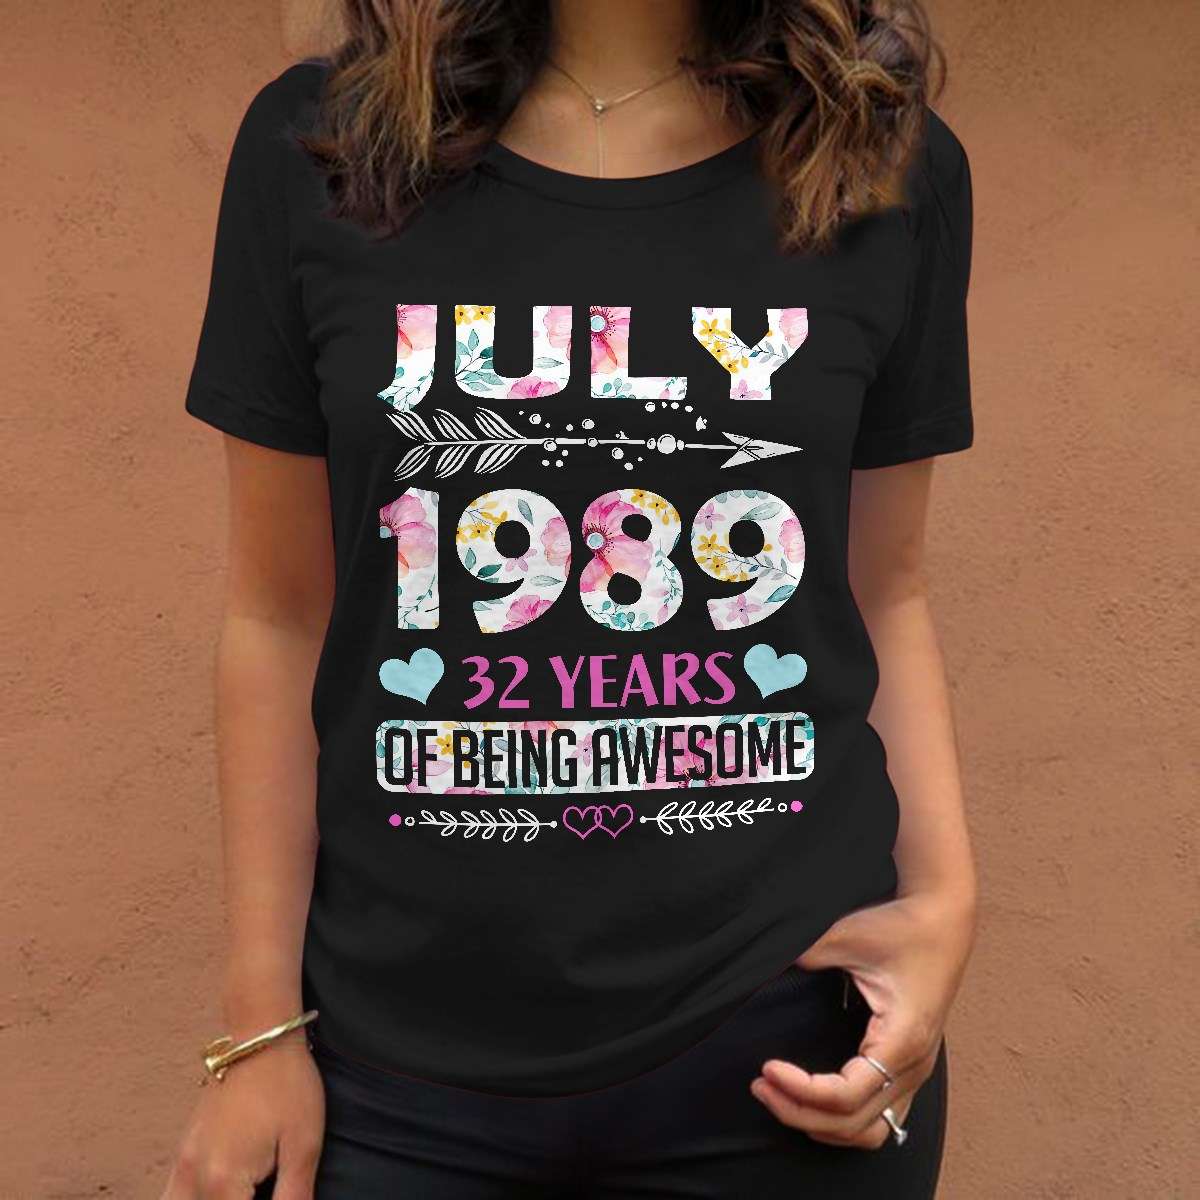 July 1989 32 years of being awesome - Awesome person born in 1989, Born in July 1989